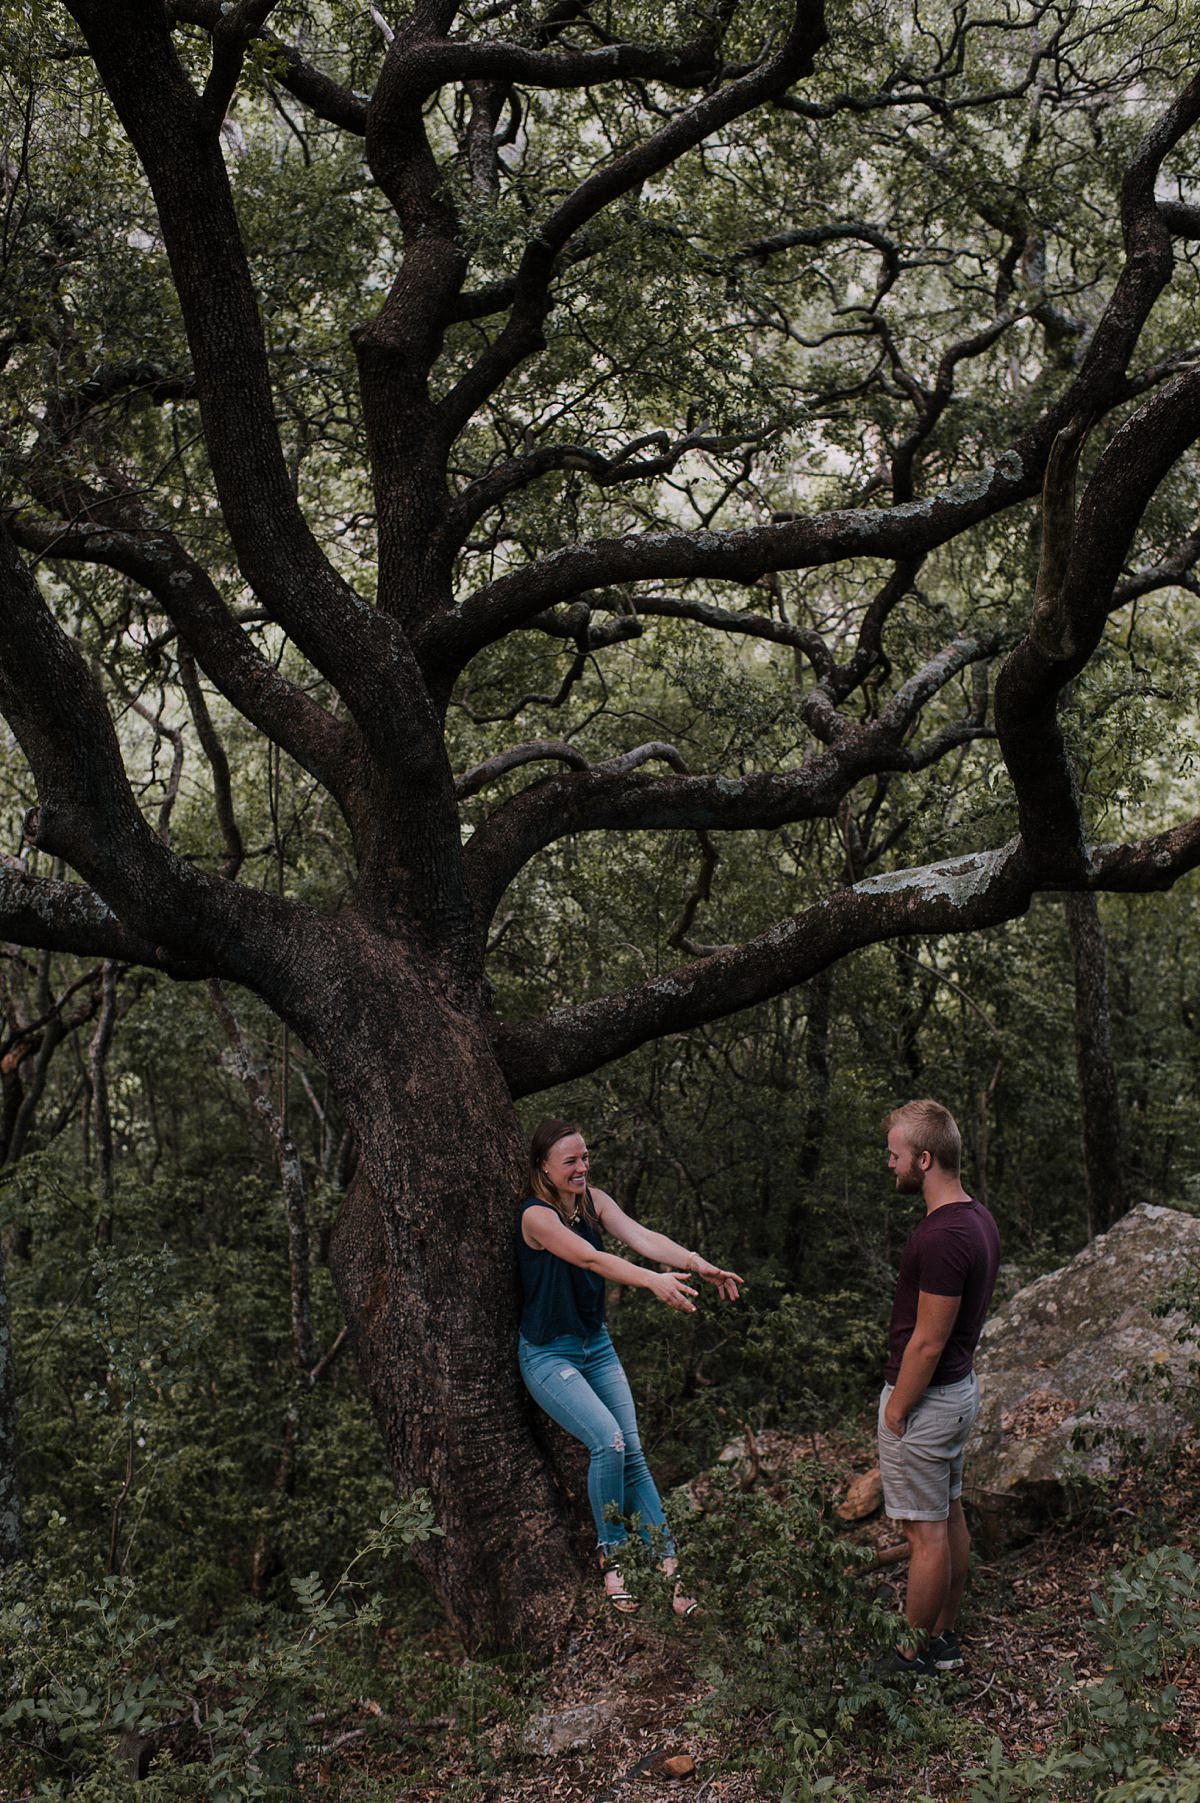 Holly and Joshua // Engaged // Kim Tracey Photography